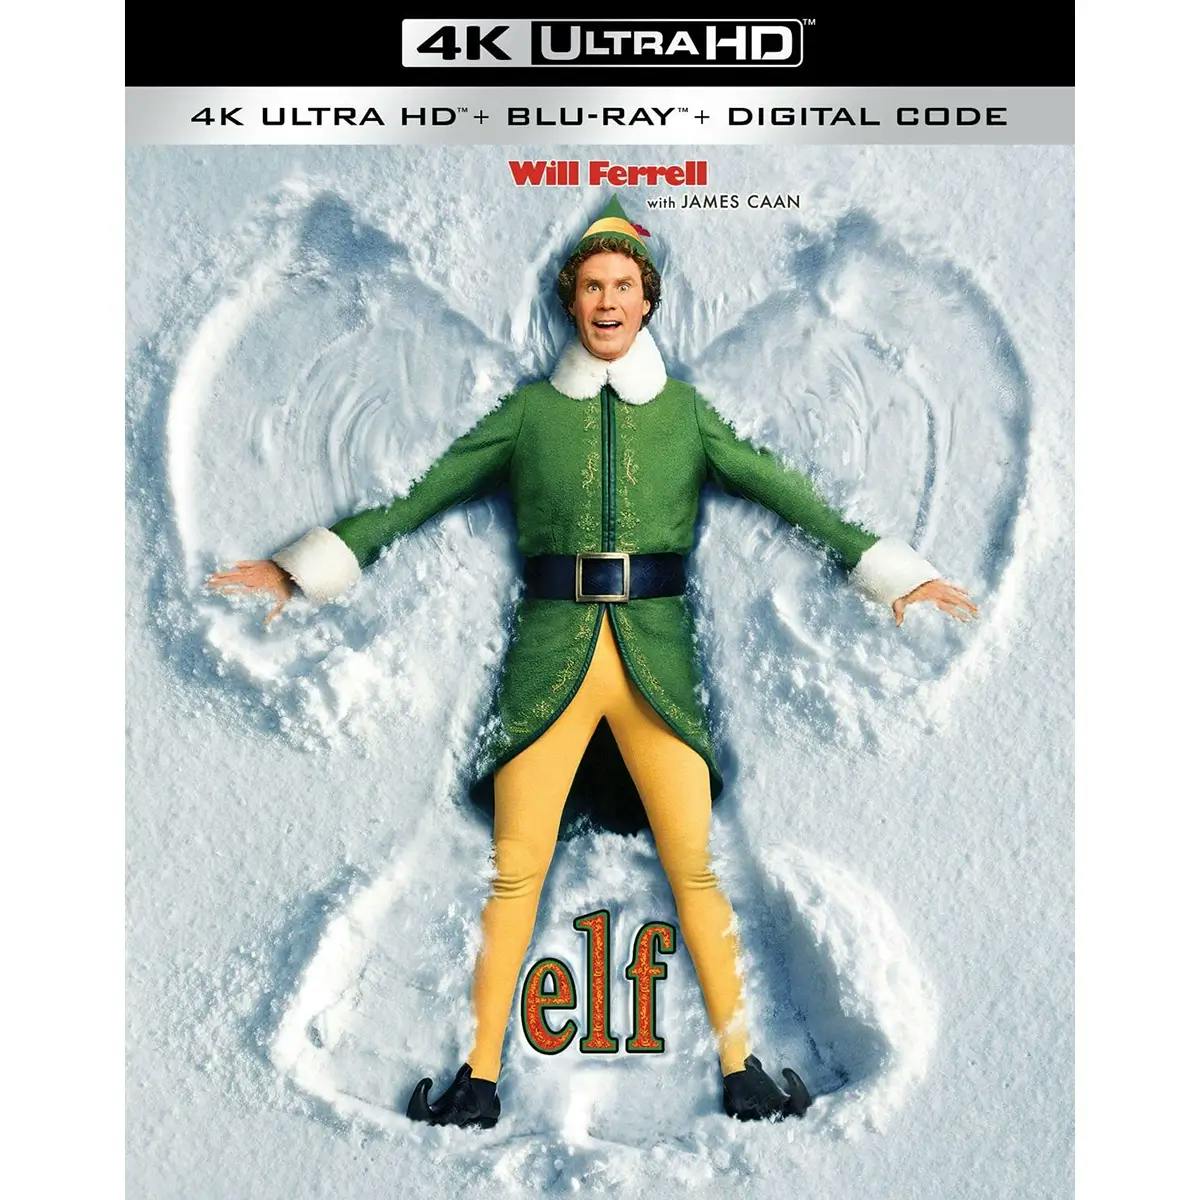 Box art for the Blu-ray and 4K version of the classic Christmas movie “Elf.”